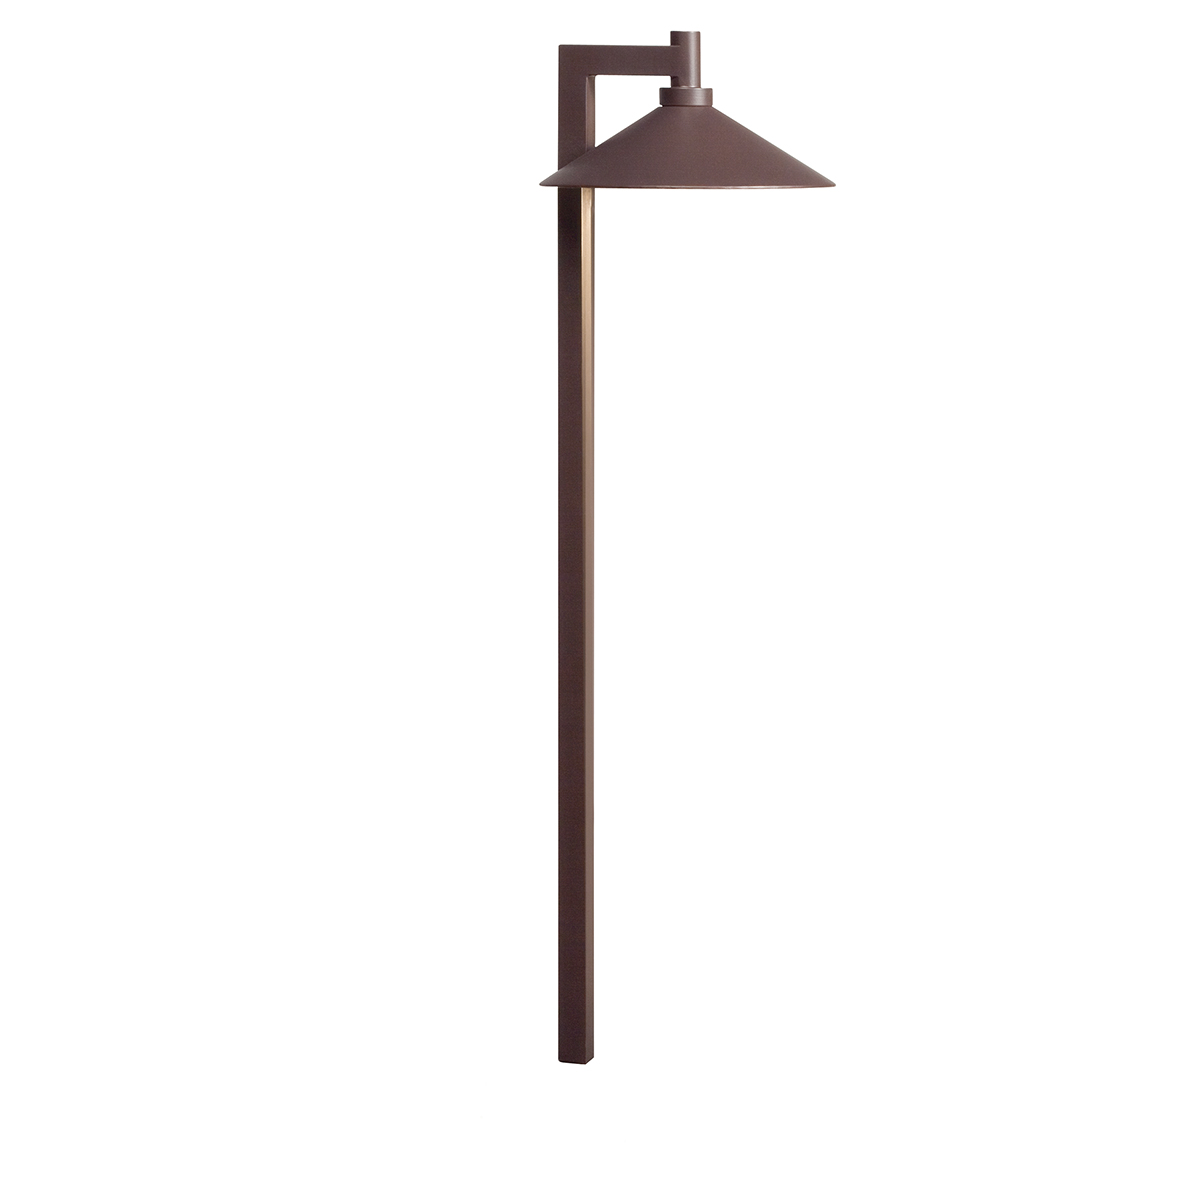 Kichler 15800AZT30R Led Ripley Path in Textured Architectural Bronze